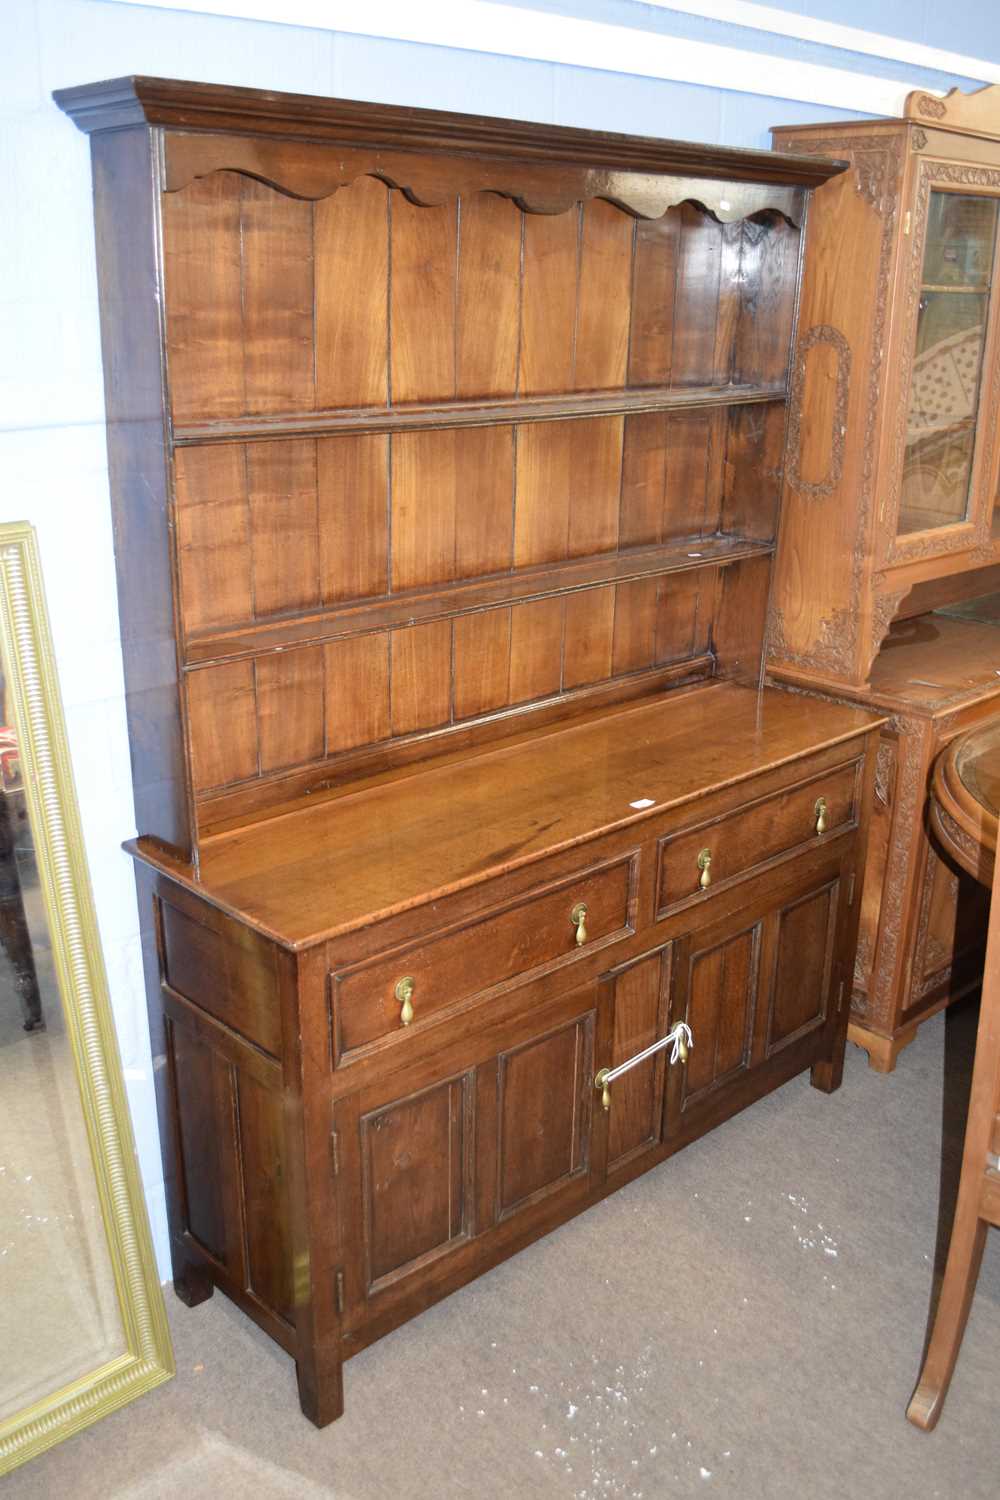 18th century style oak dresser with two shelves back over a base with two drawers and two panelled